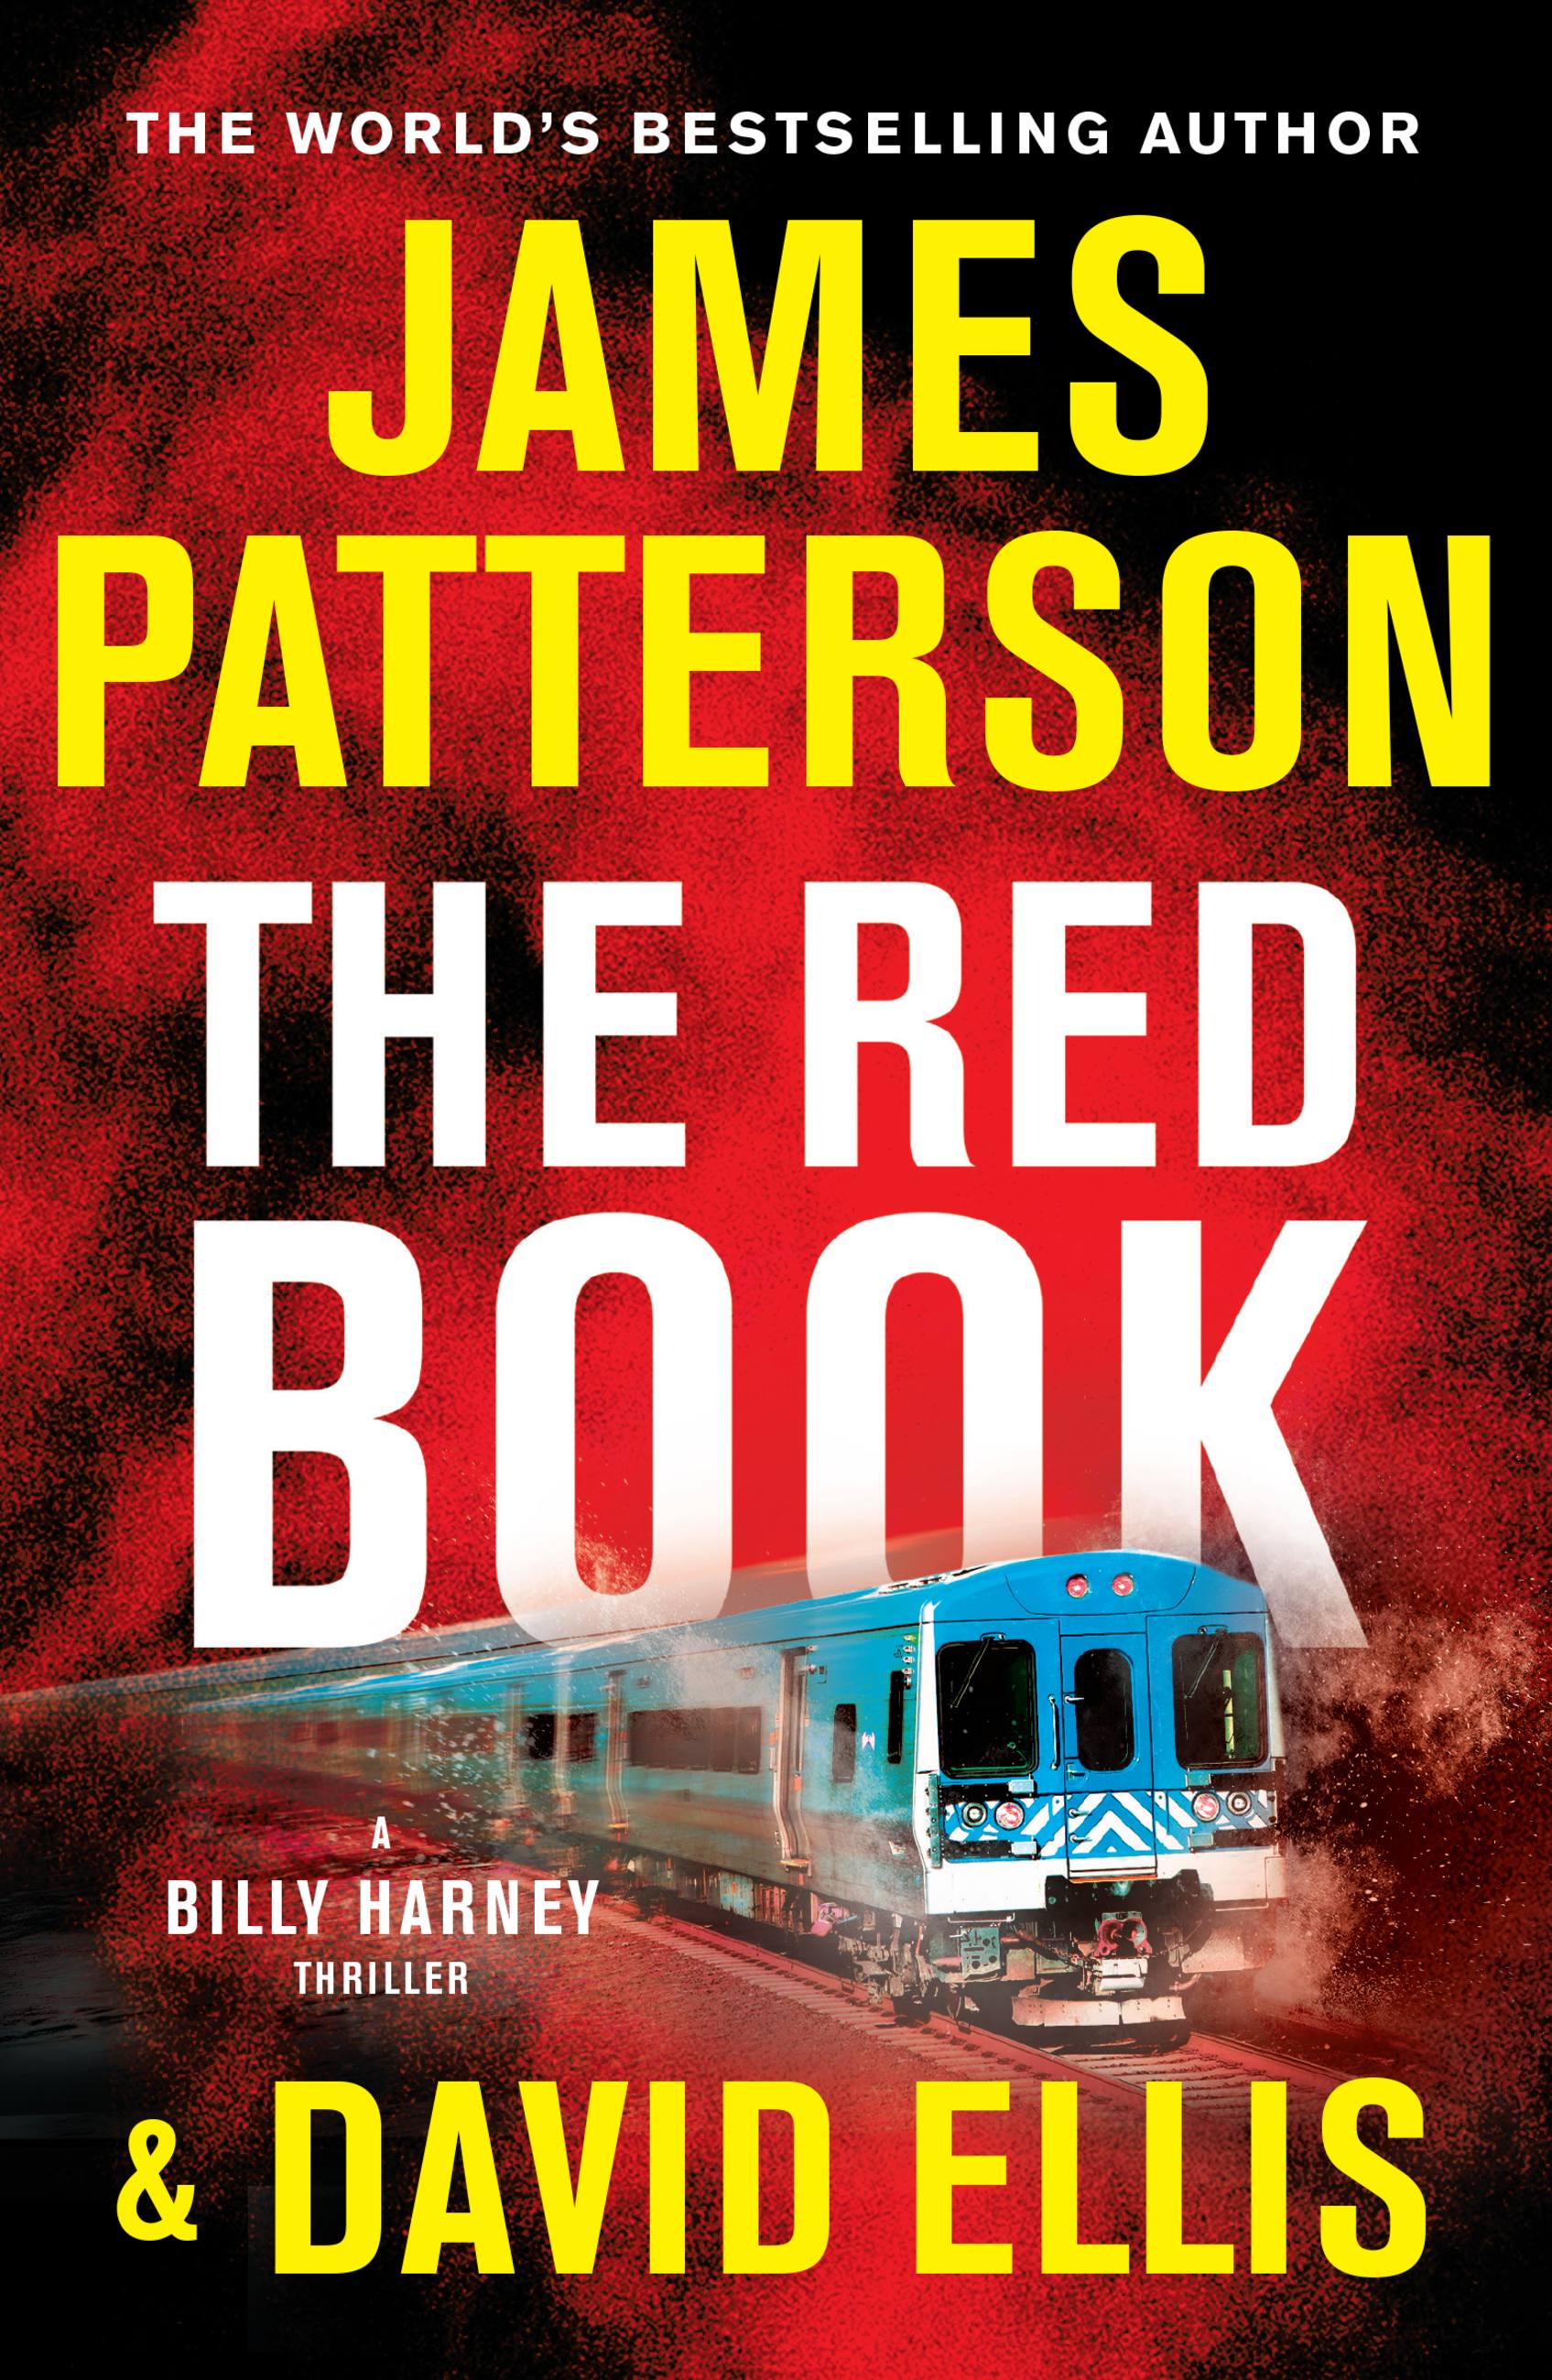 The Red Book by James Patterson